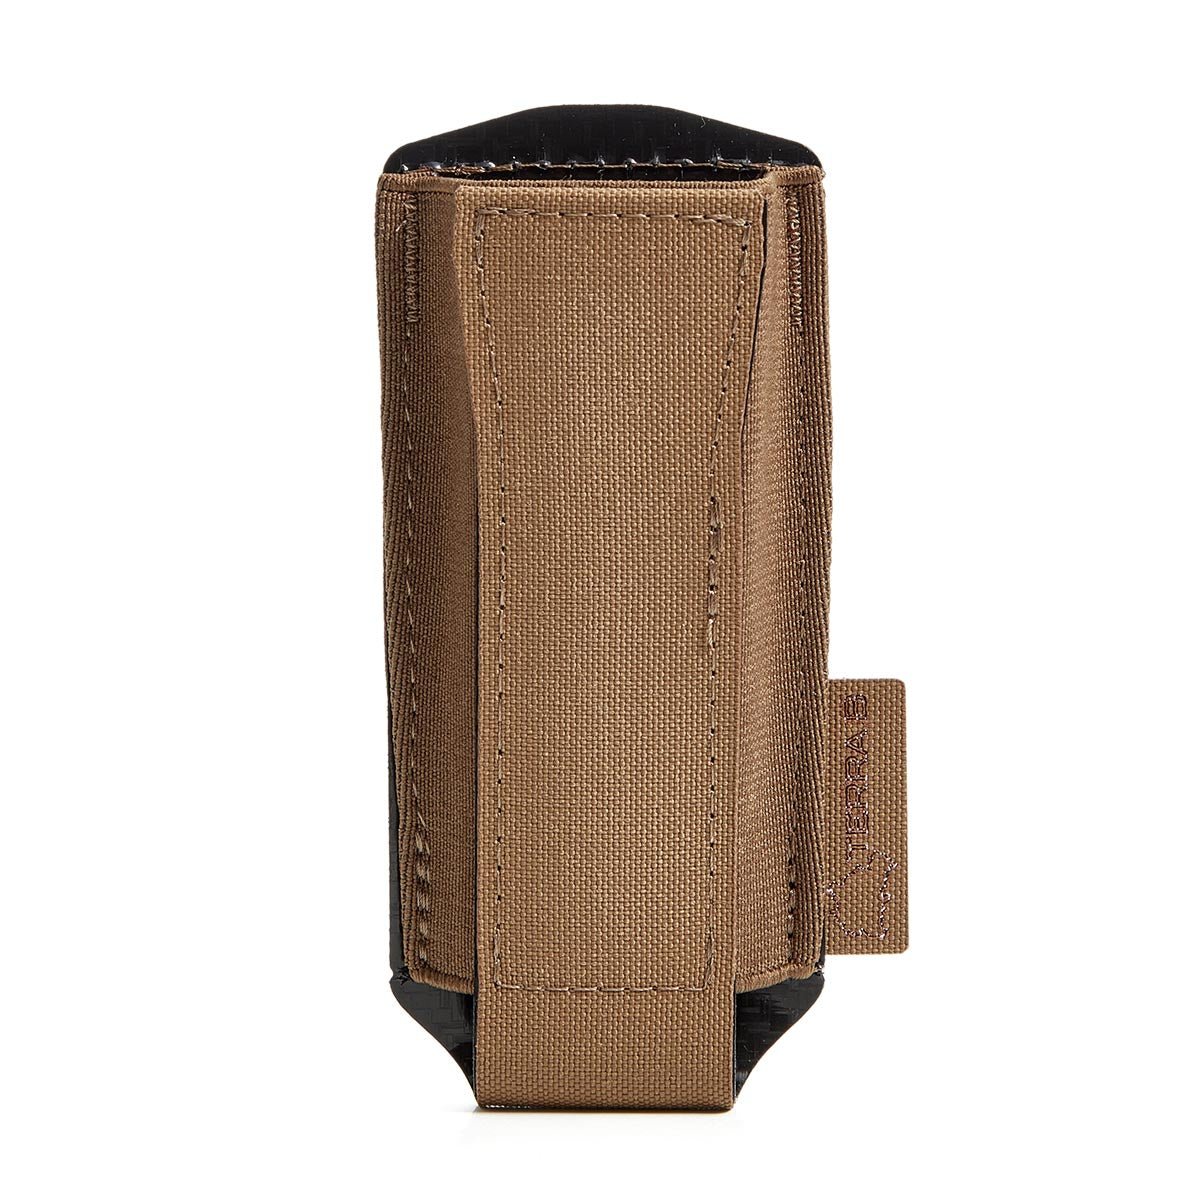 TERRA B® Mag Pouch Small - Coyote Brown